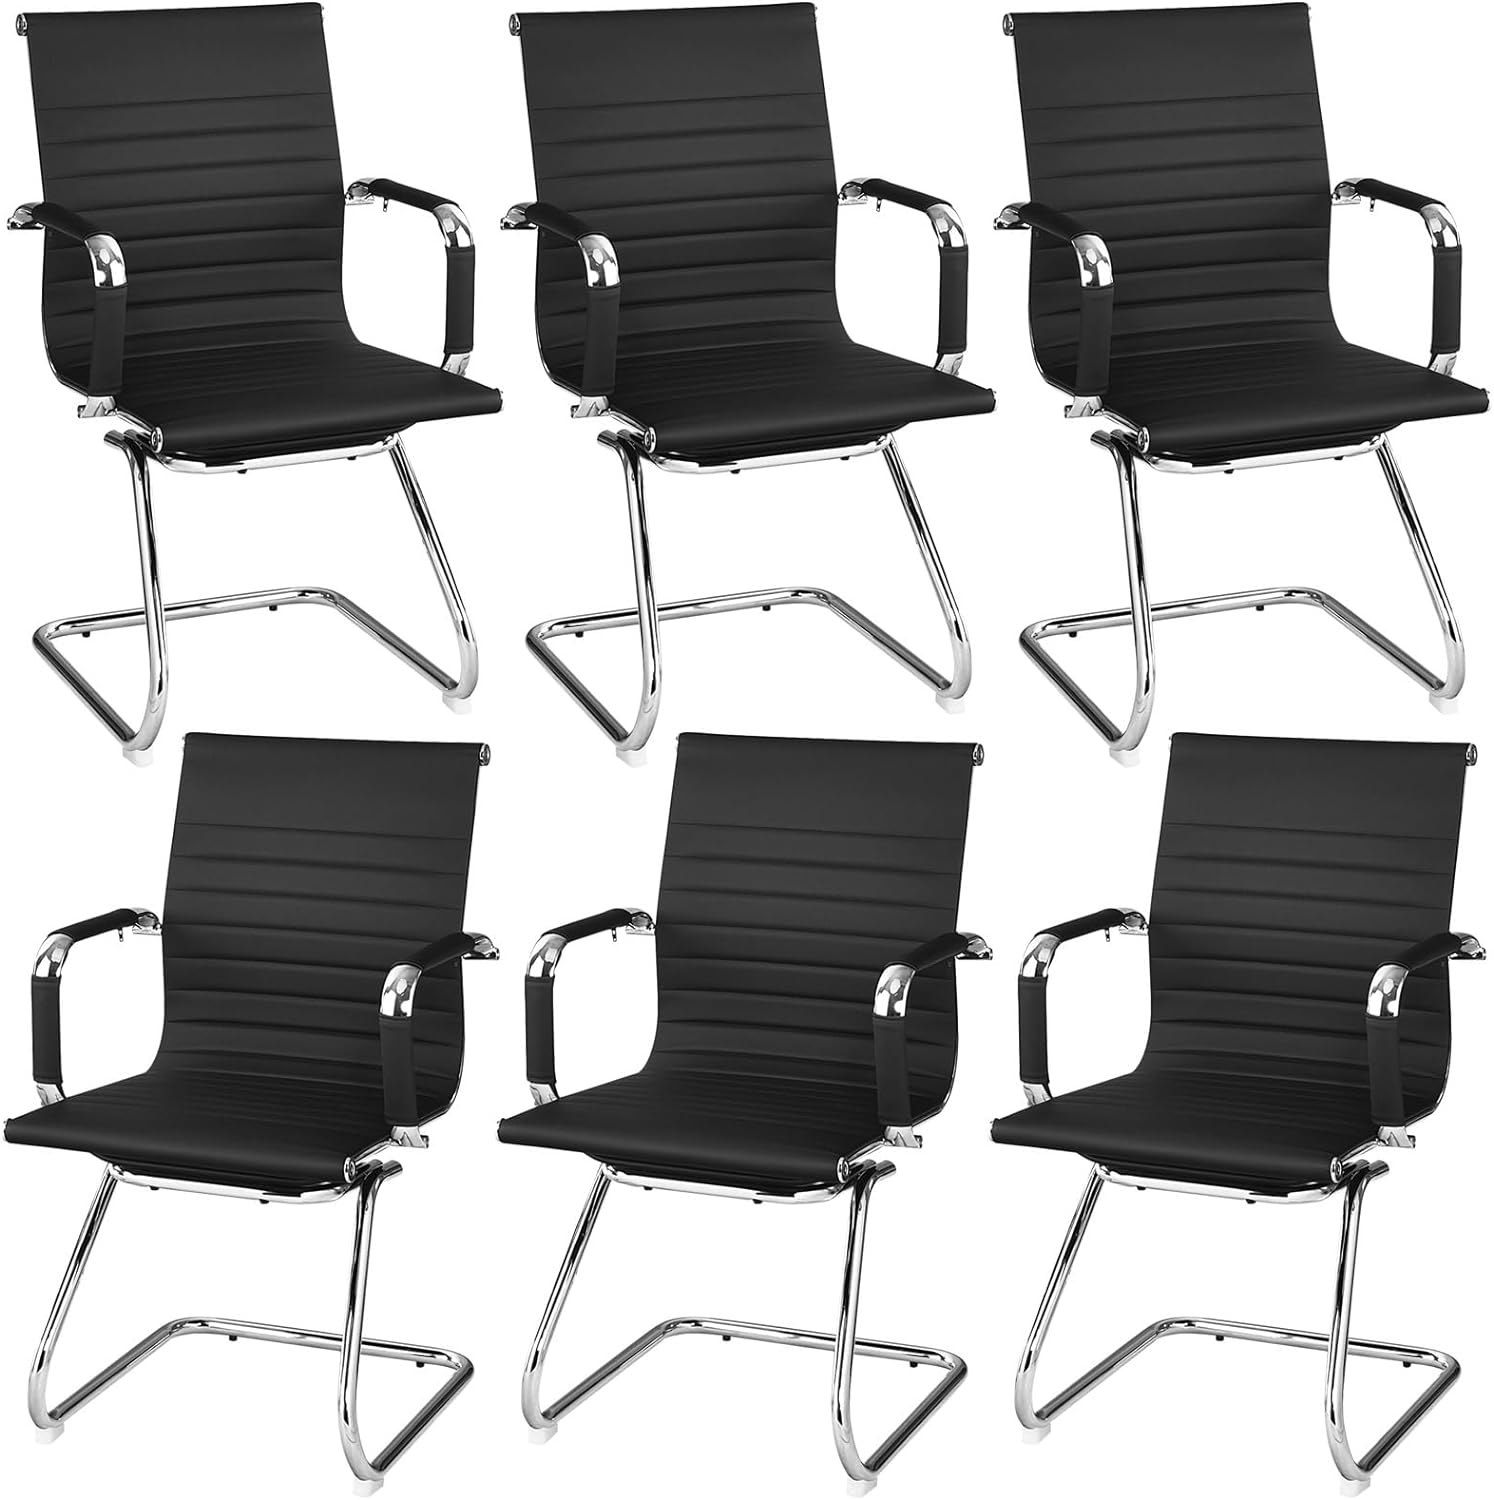 Giantex Conference Chair Set of 4 Heavy Duty PU Leather W/Protective Arm Sleeves